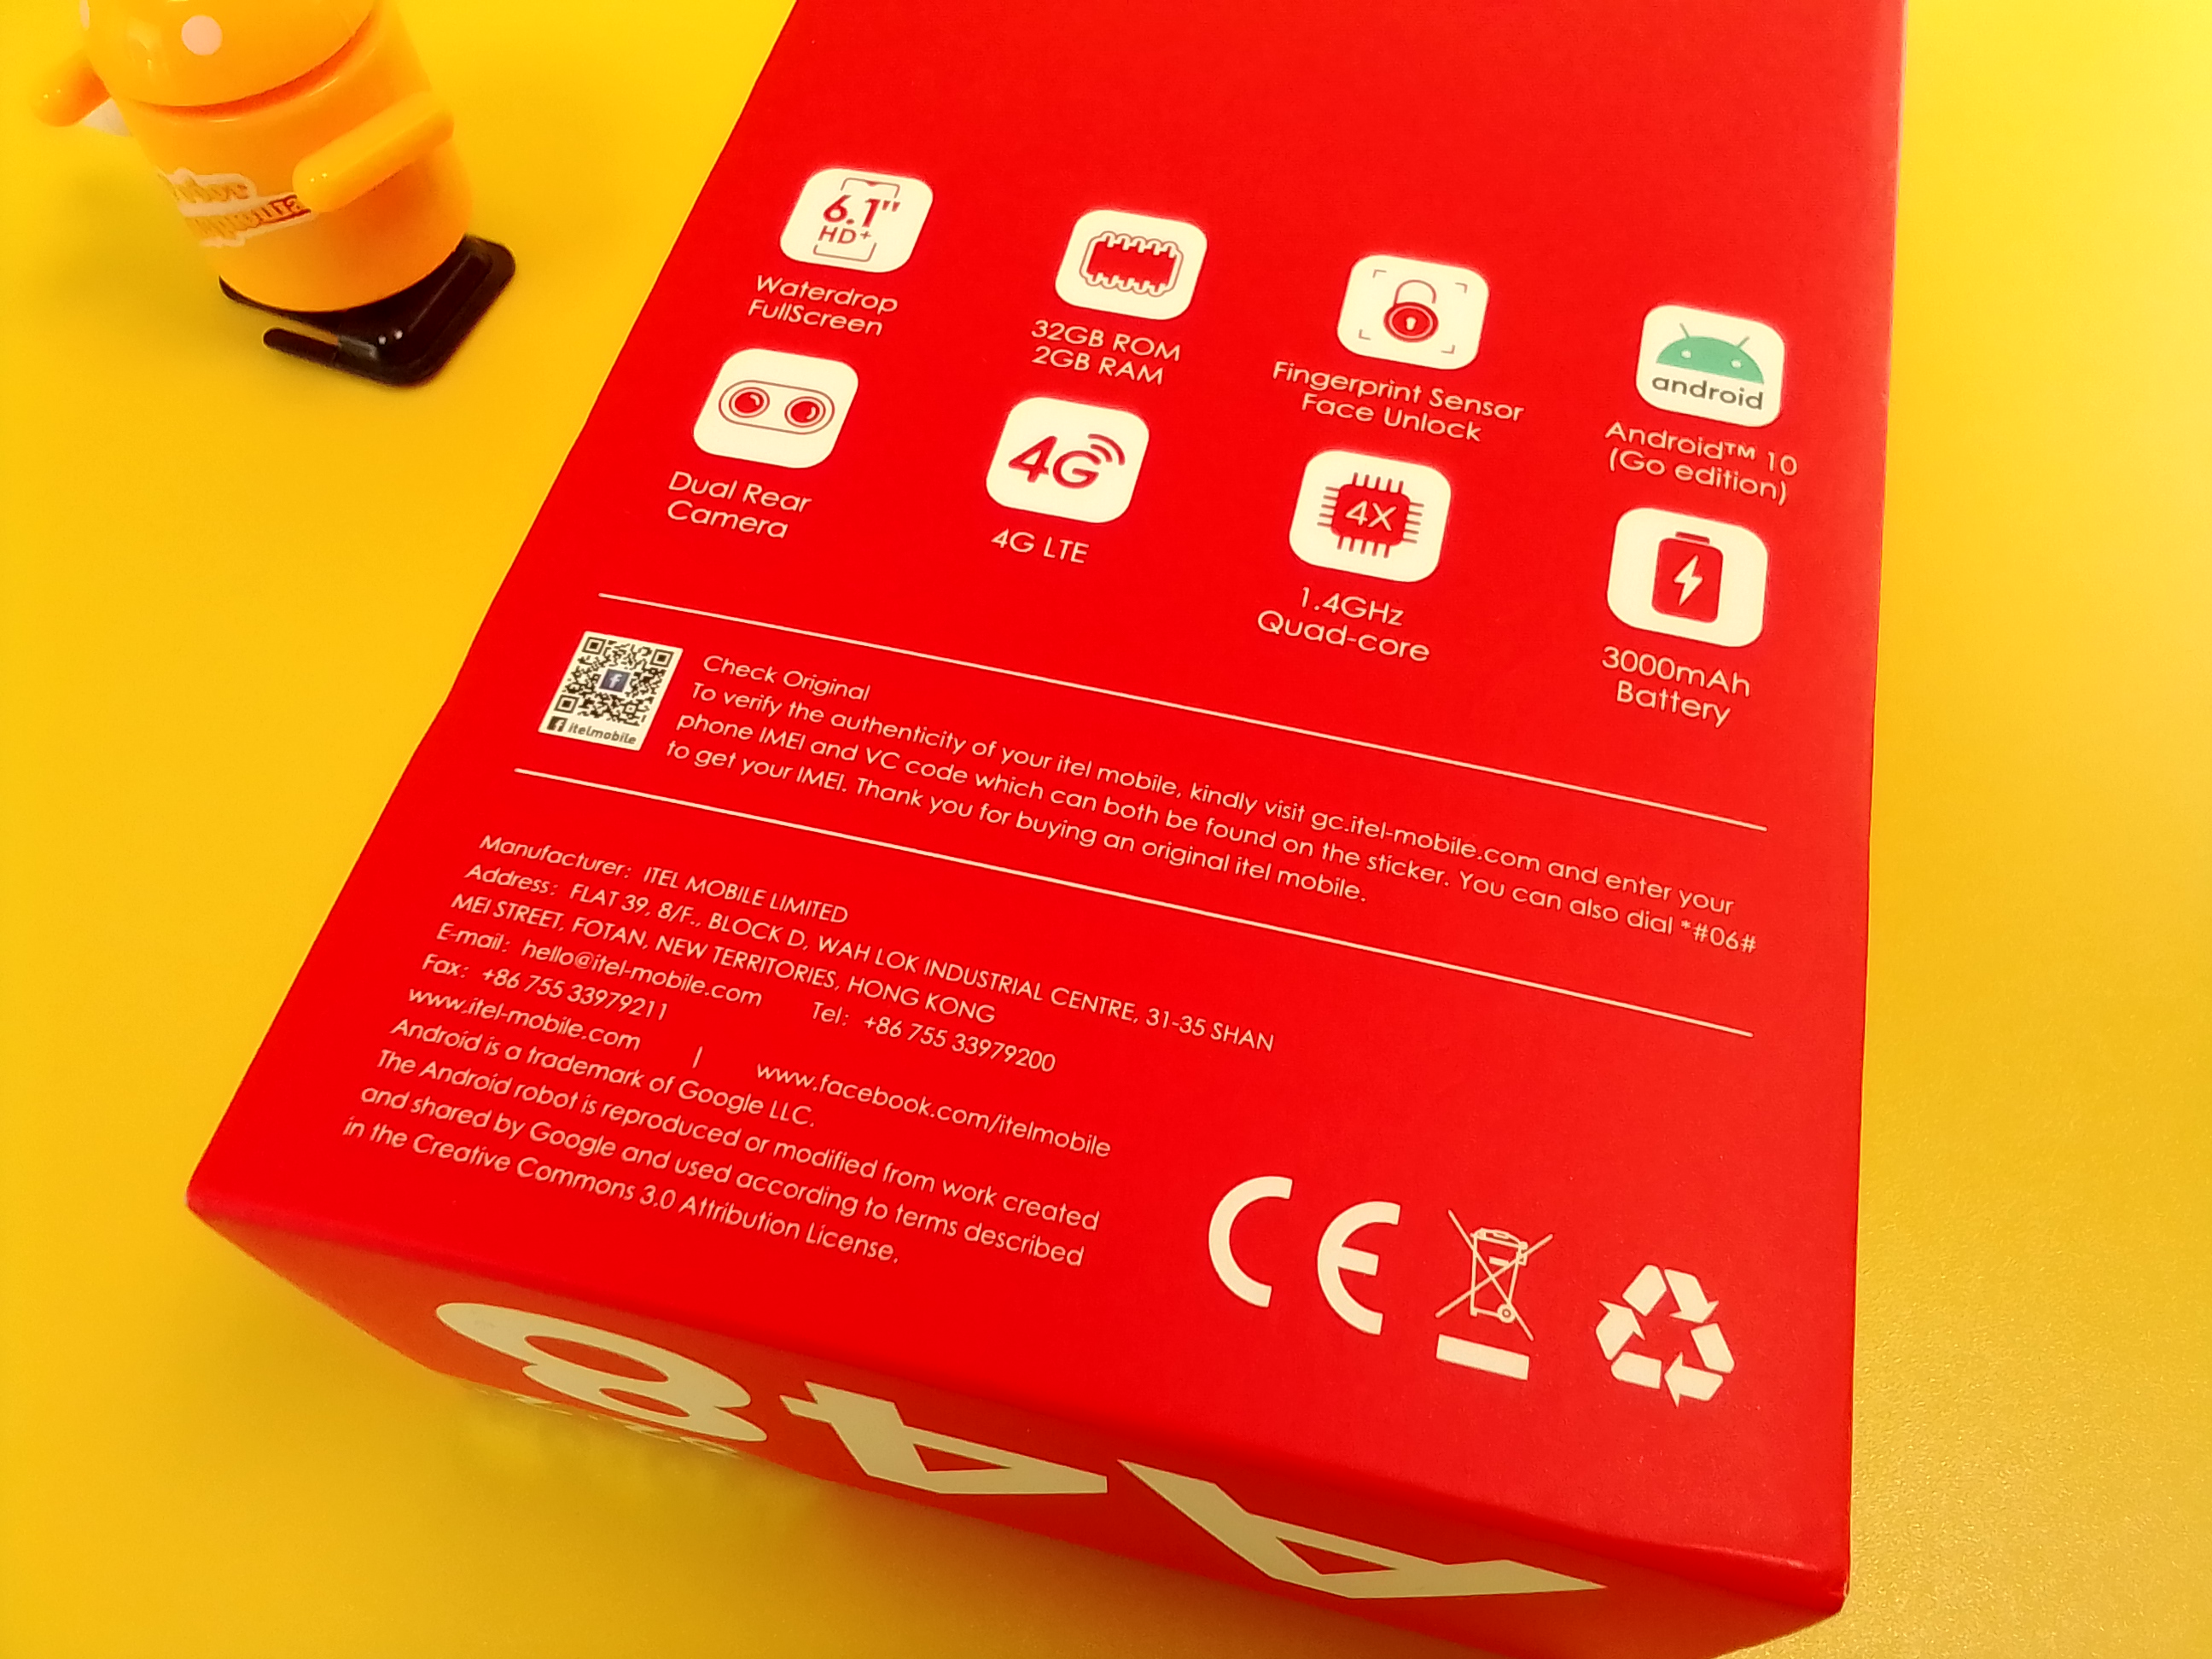 Review of smartphone Itel A48 - Compact and budget! [VIDEO] ⋆ 2